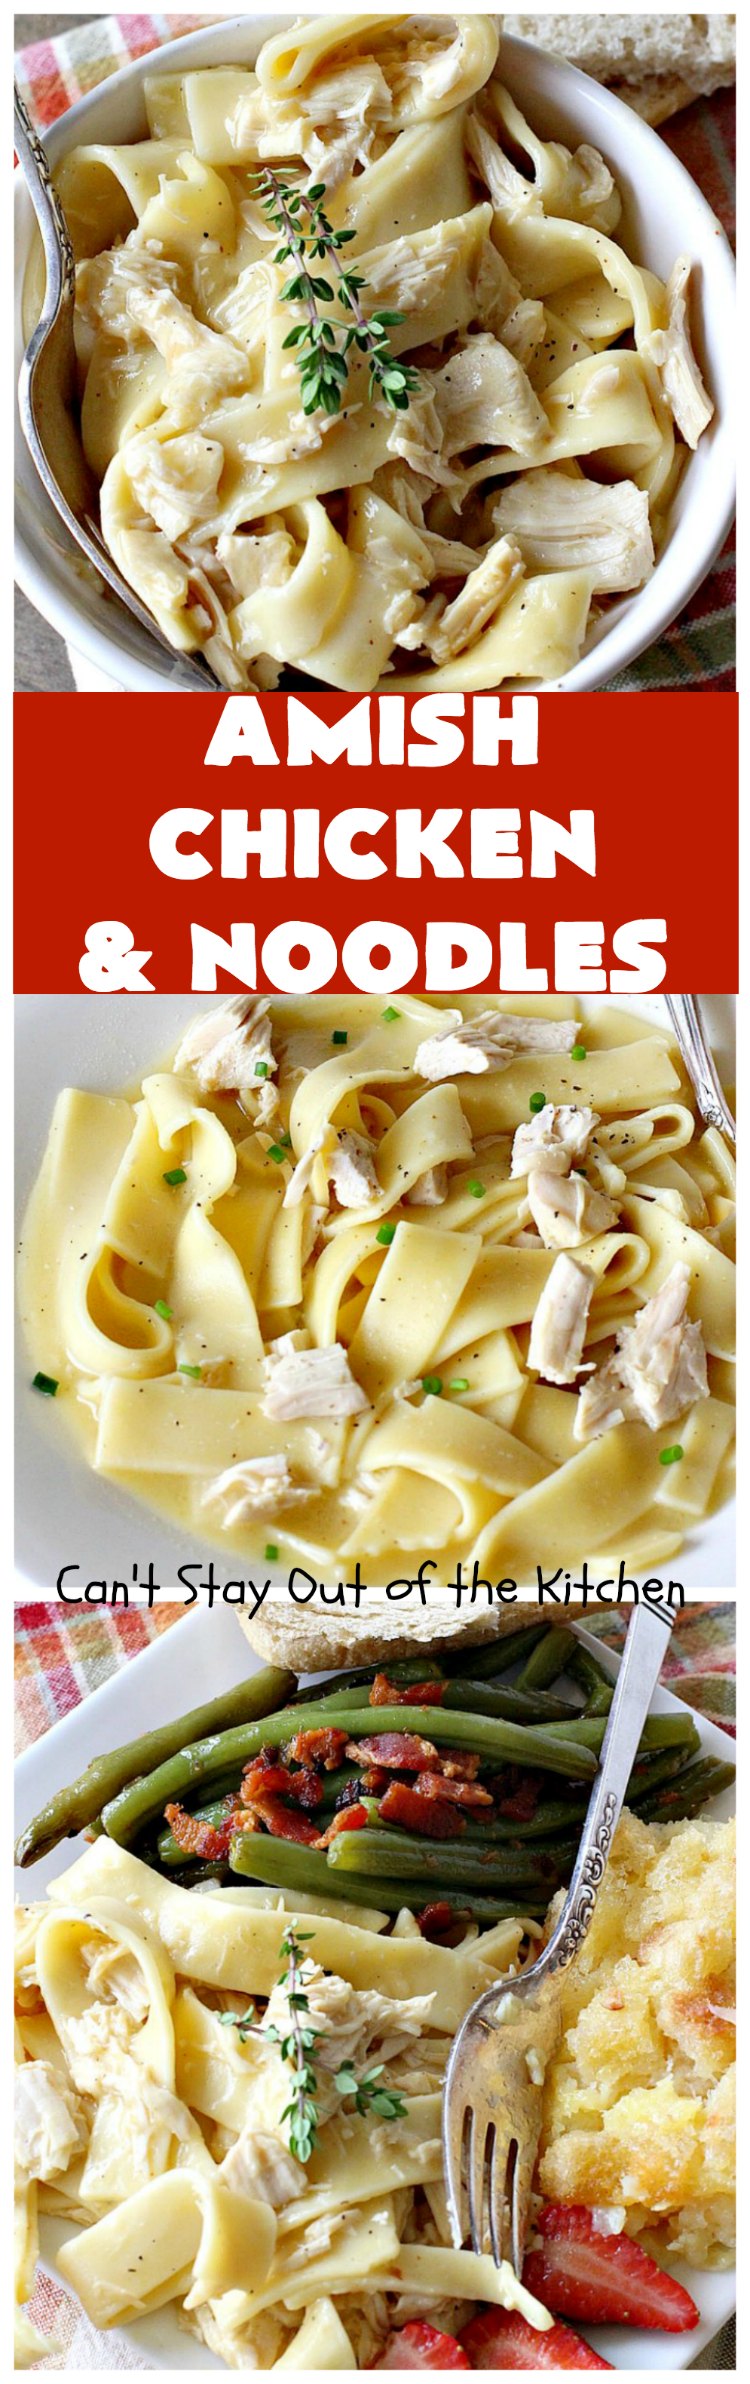 Amish Chicken and Noodles | Can't Stay Out of the Kitchen